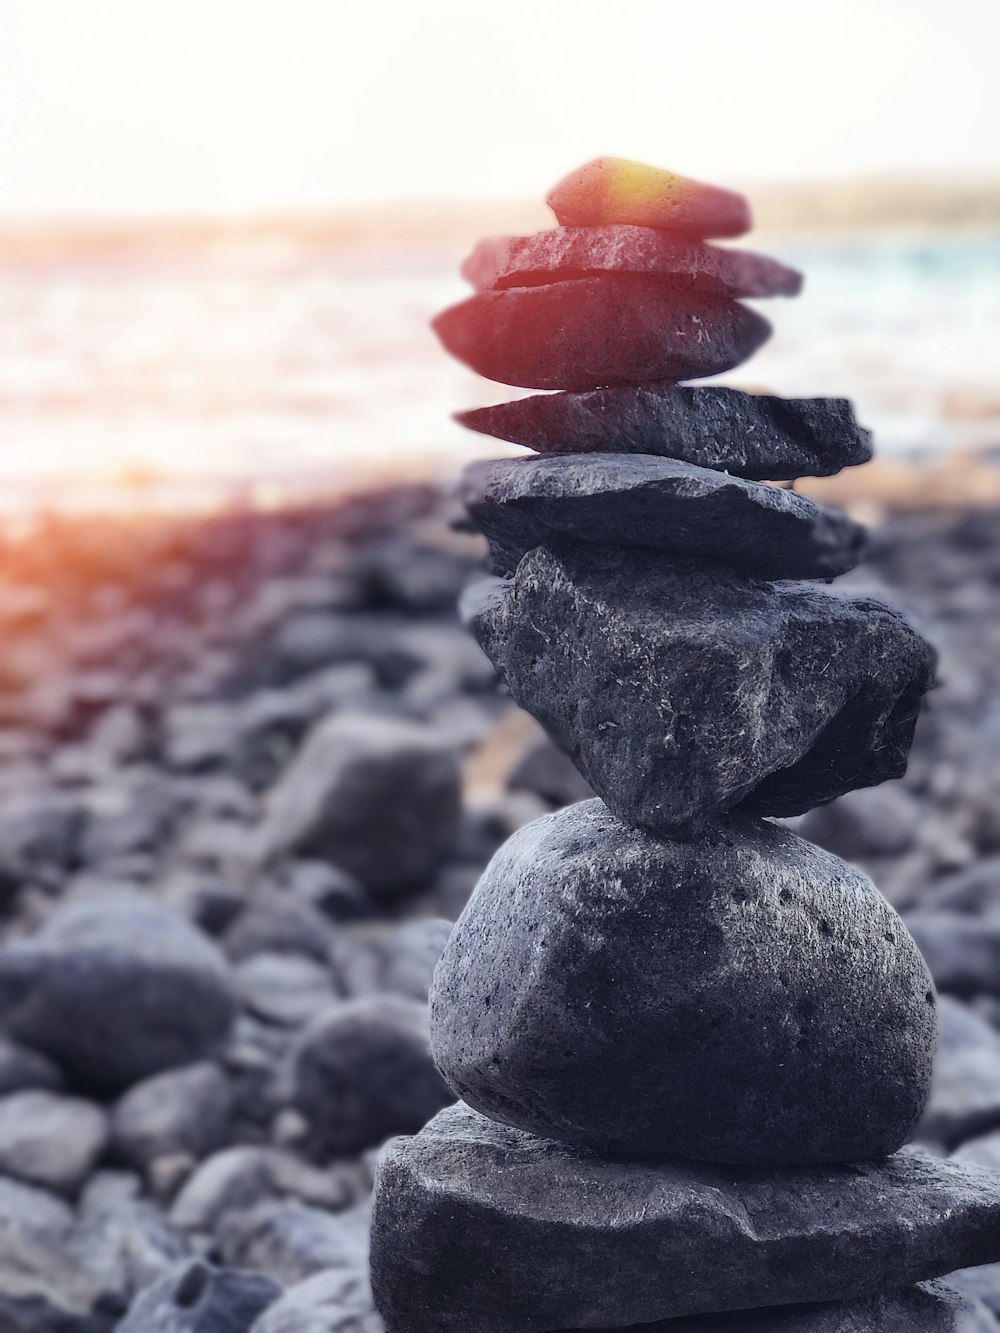 100+ Balance Pictures  Download Free Images & Stock Photos on Unsplash